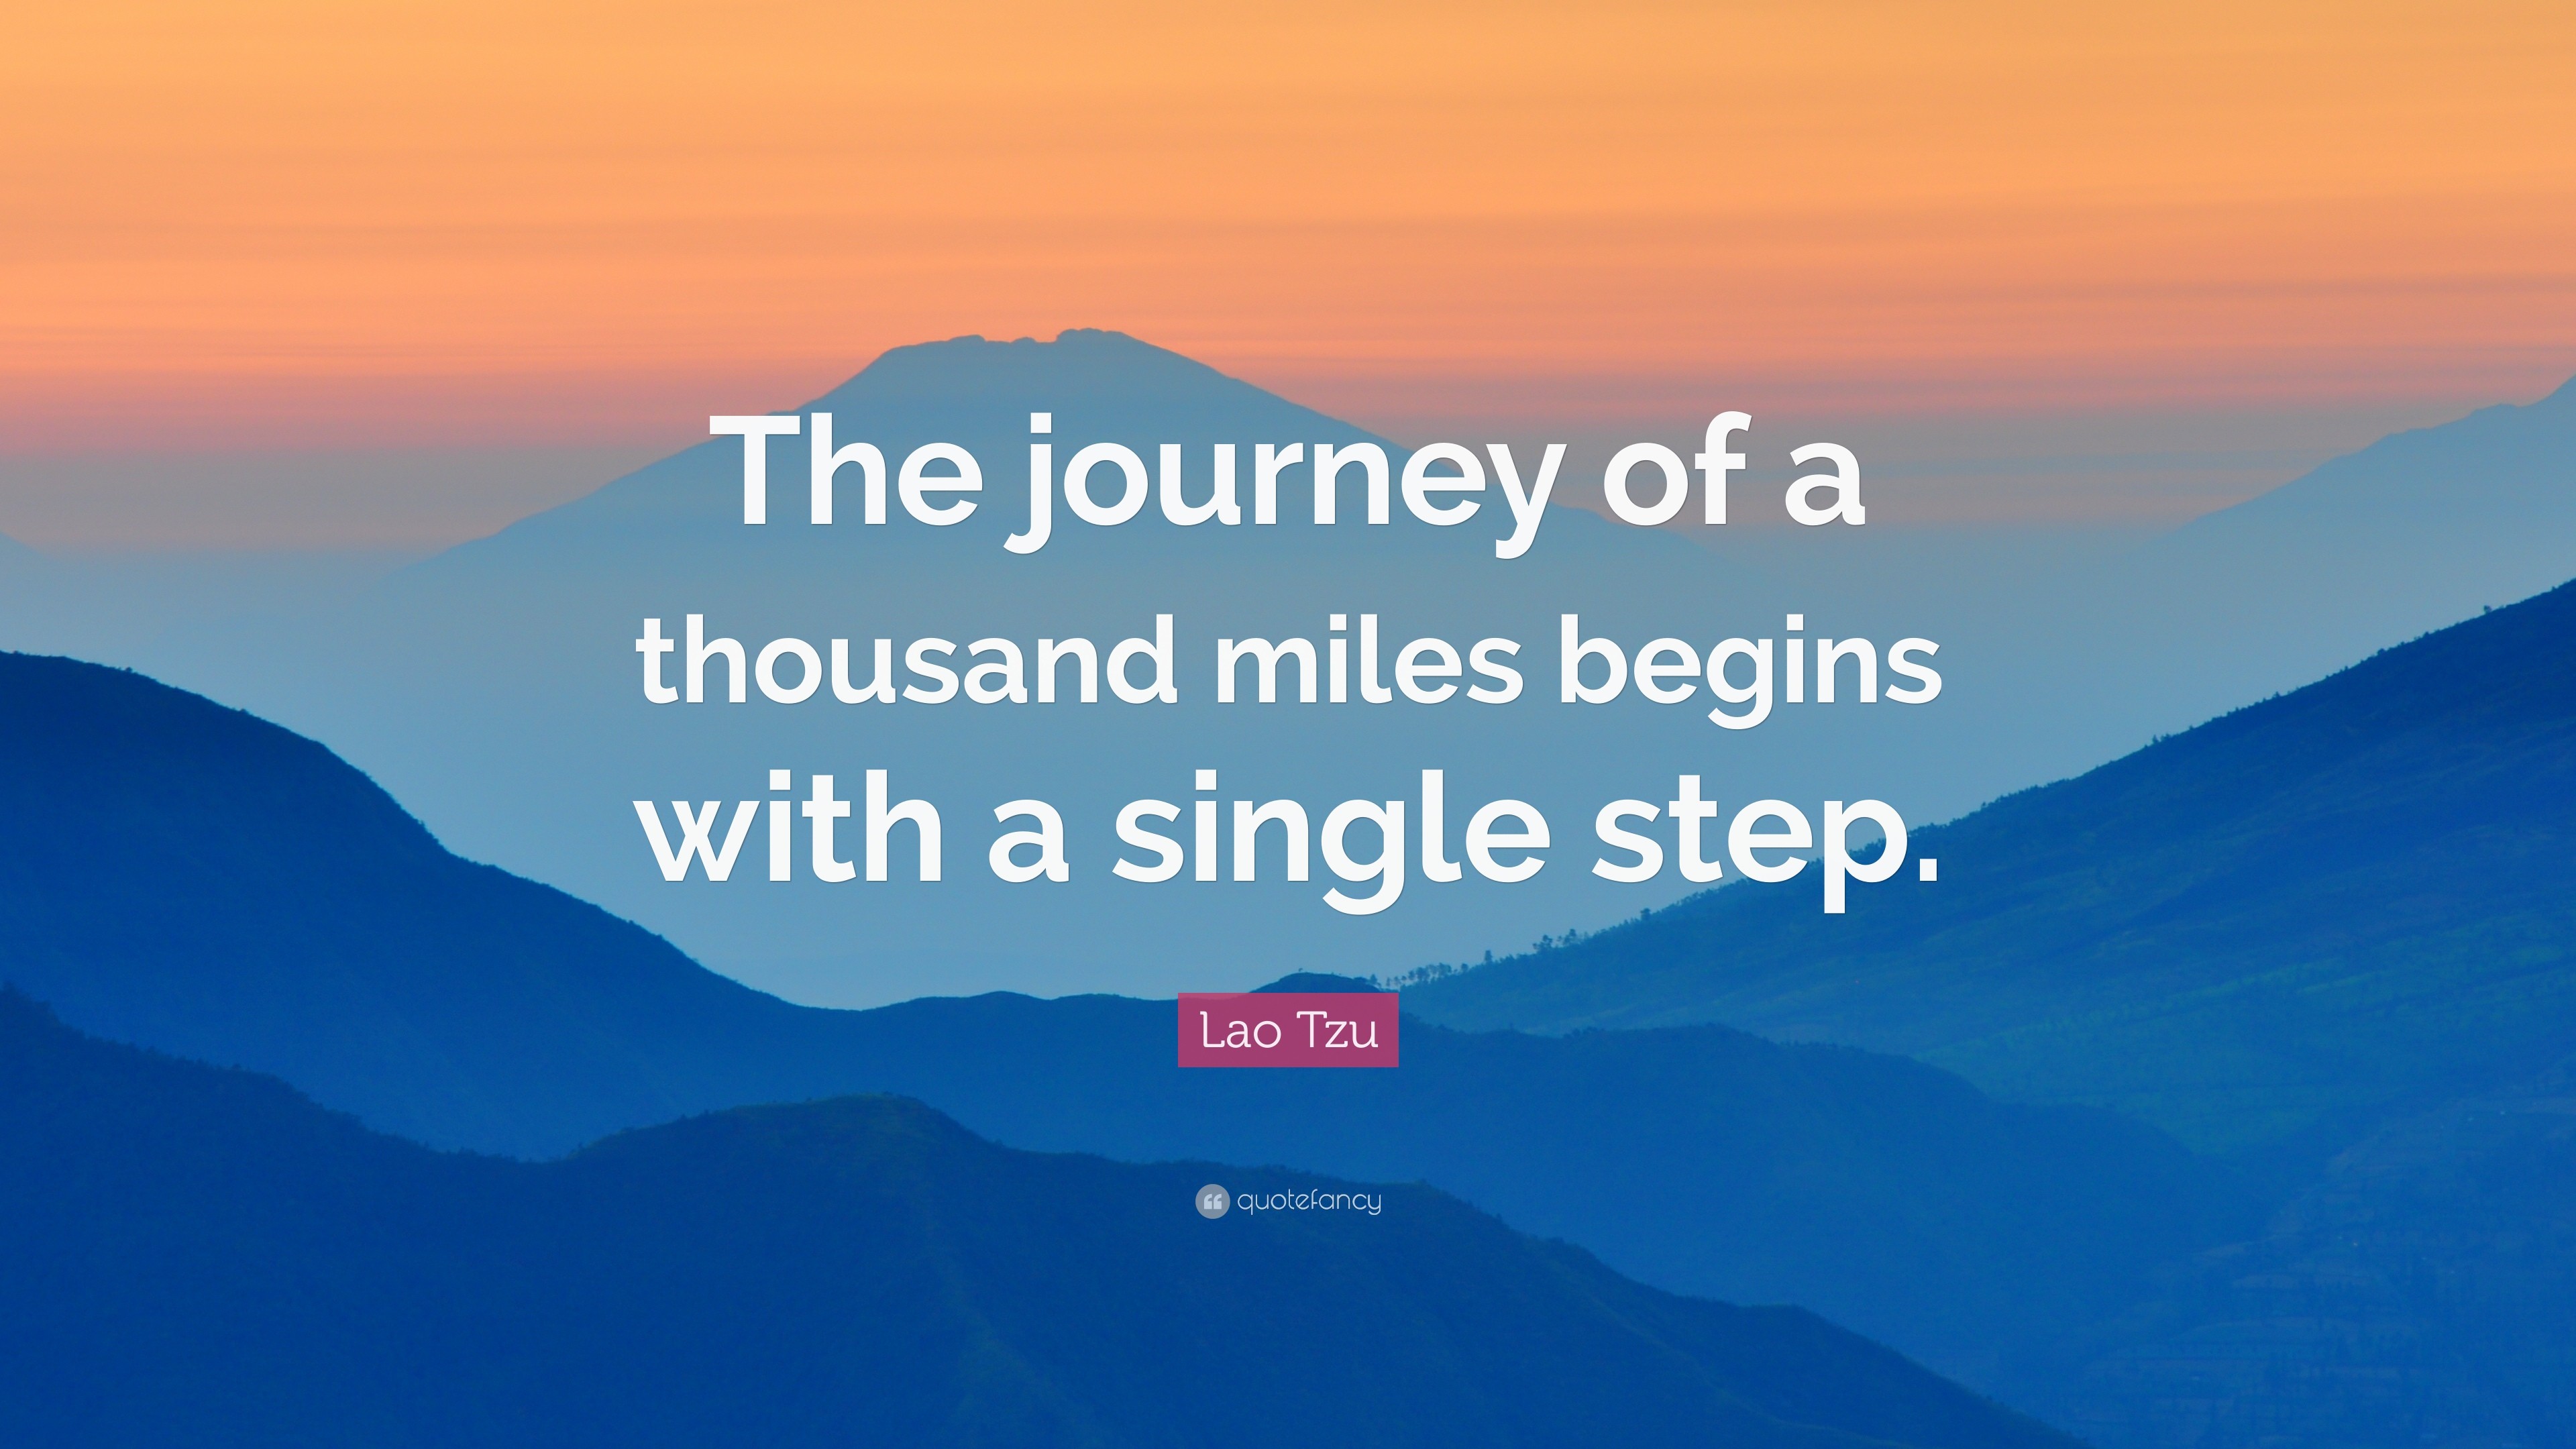 3840x2160 Lao Tzu Quote: “The journey of a thousand miles begins with a single step